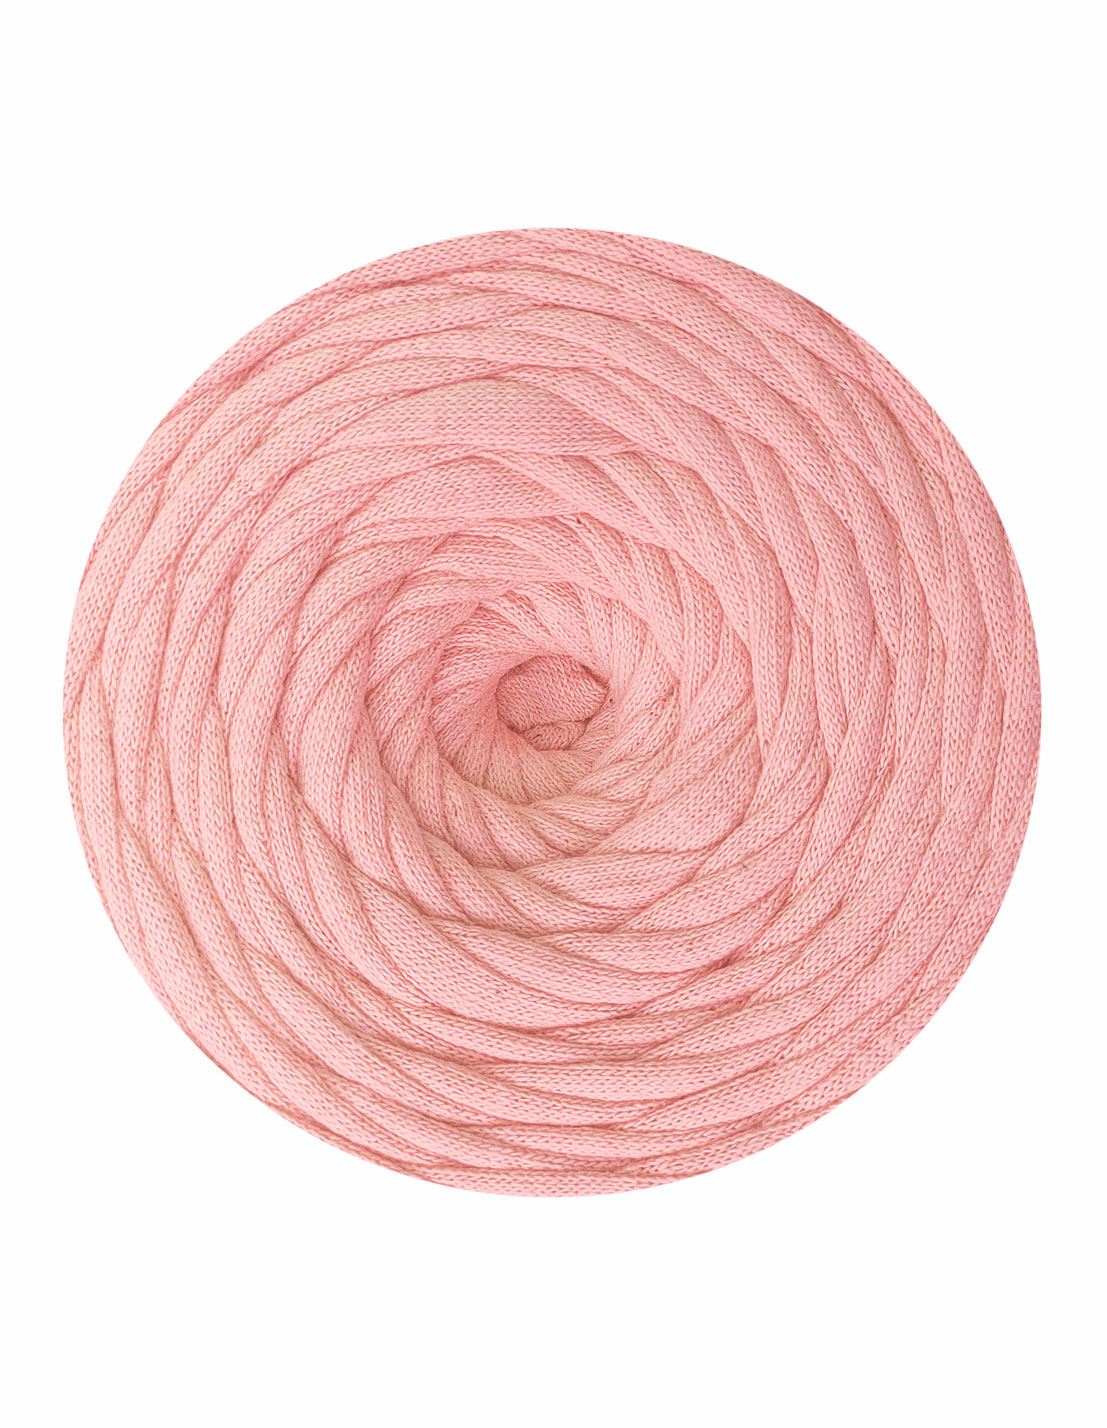 Bright Pink Jersey Be Good t-shirt yarn by Wool and the Gang (500g)